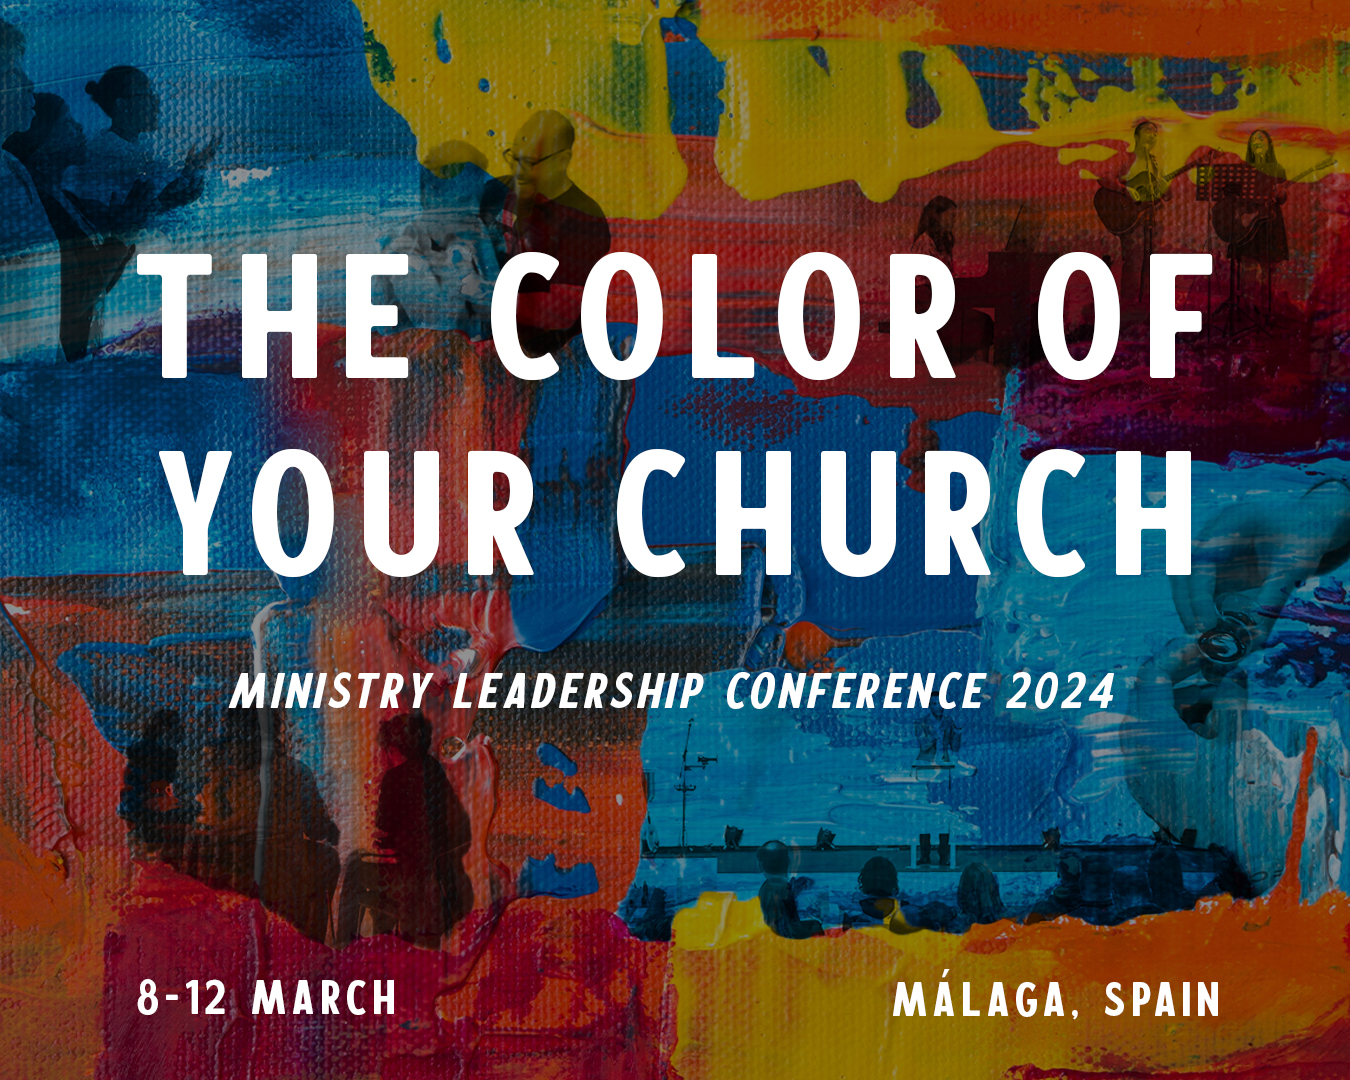 The Color of Your Church